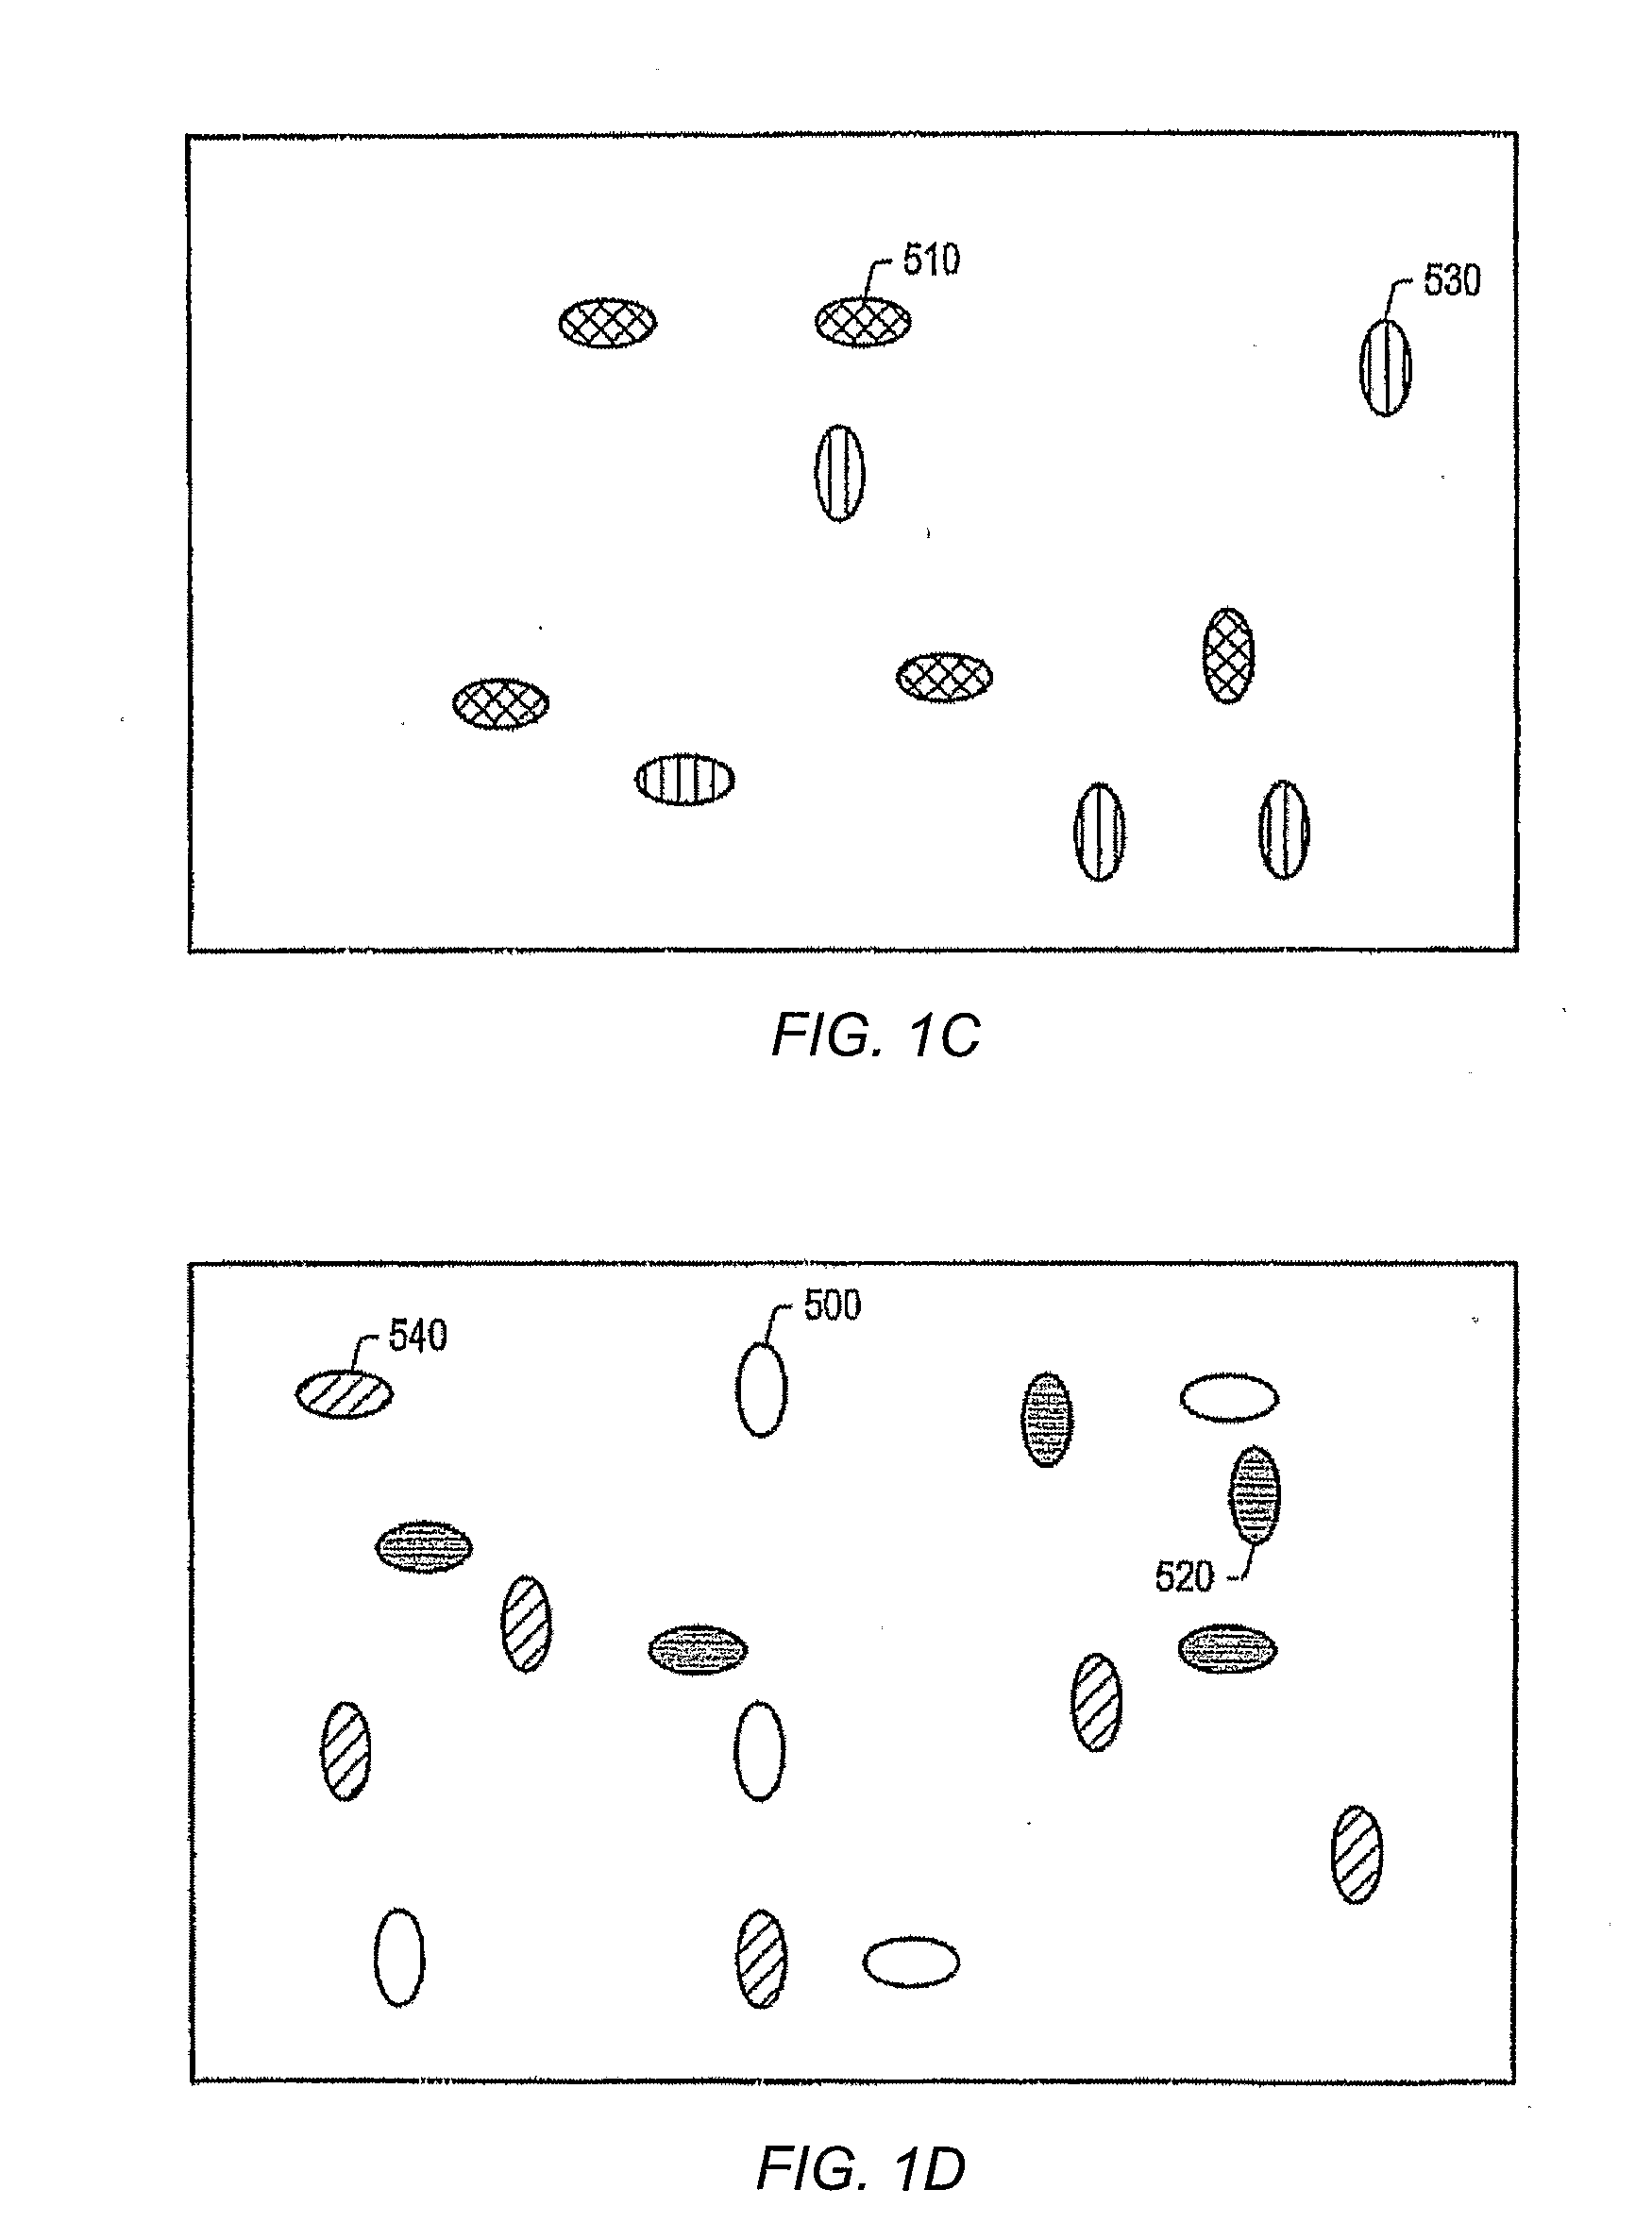 Methods and compositions related to determination and use of white blood cell counts